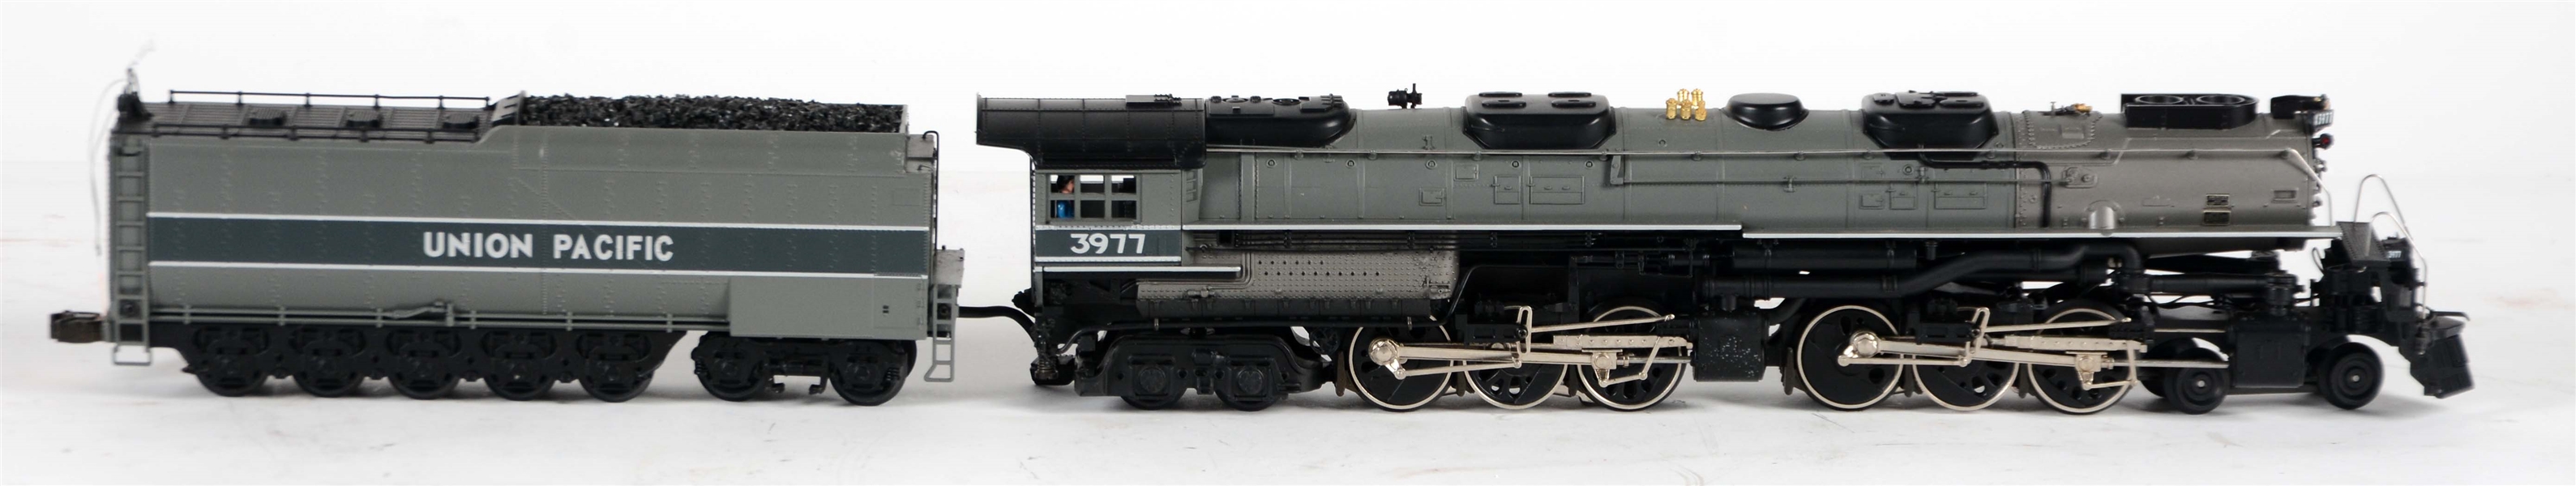 UNION PACIFIC 4664 MTH ENGINE & TENDER.